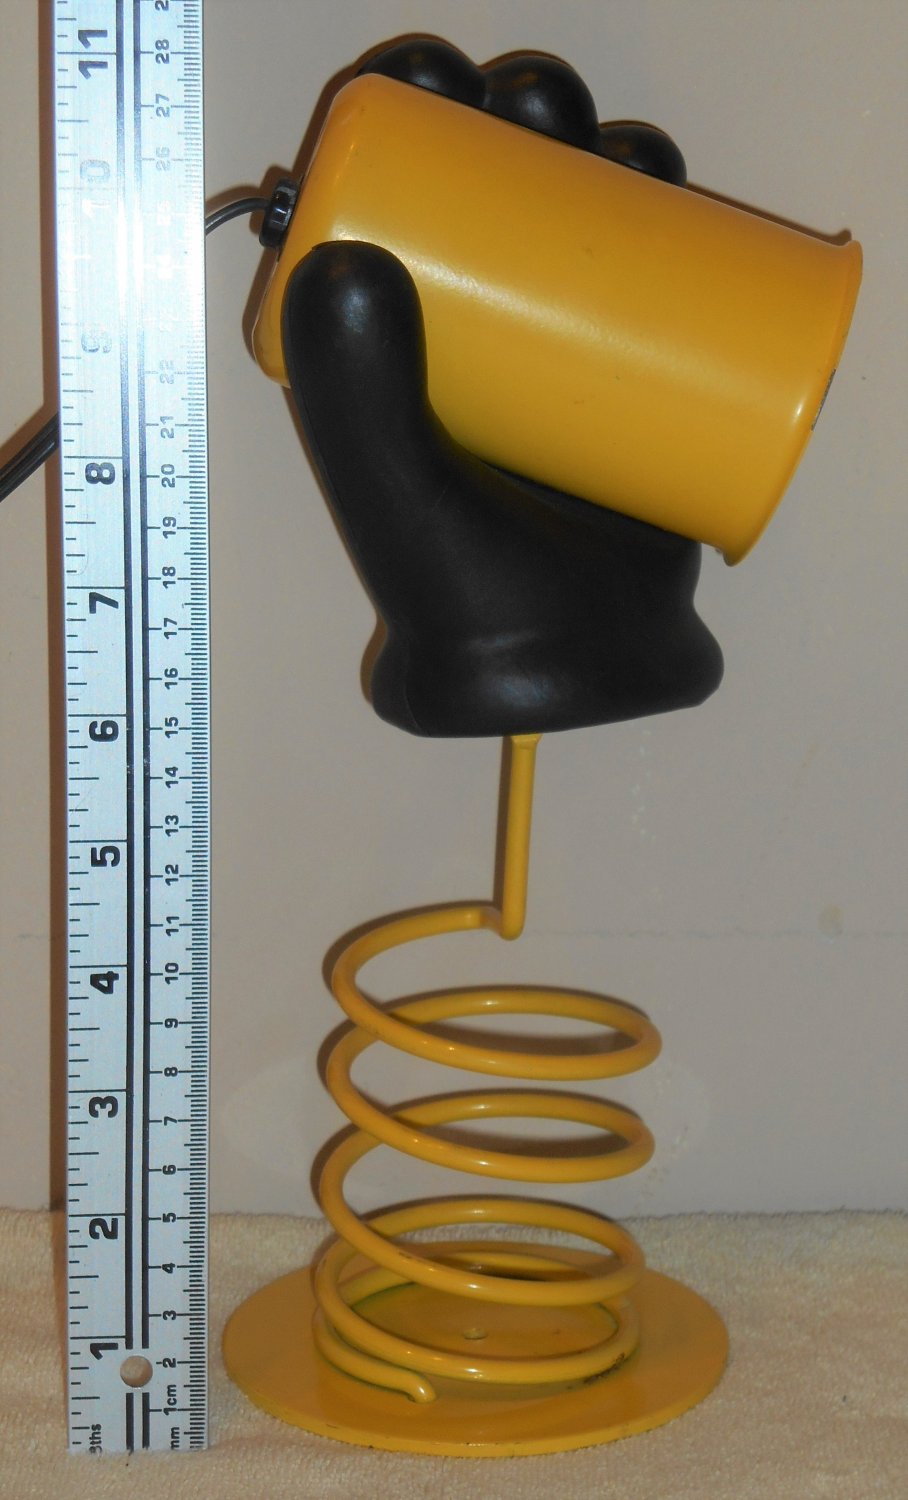 Yellow Metal Coil Spring Table Desk Novelty Lamp With Black Hand Glove Holding Light AC Power